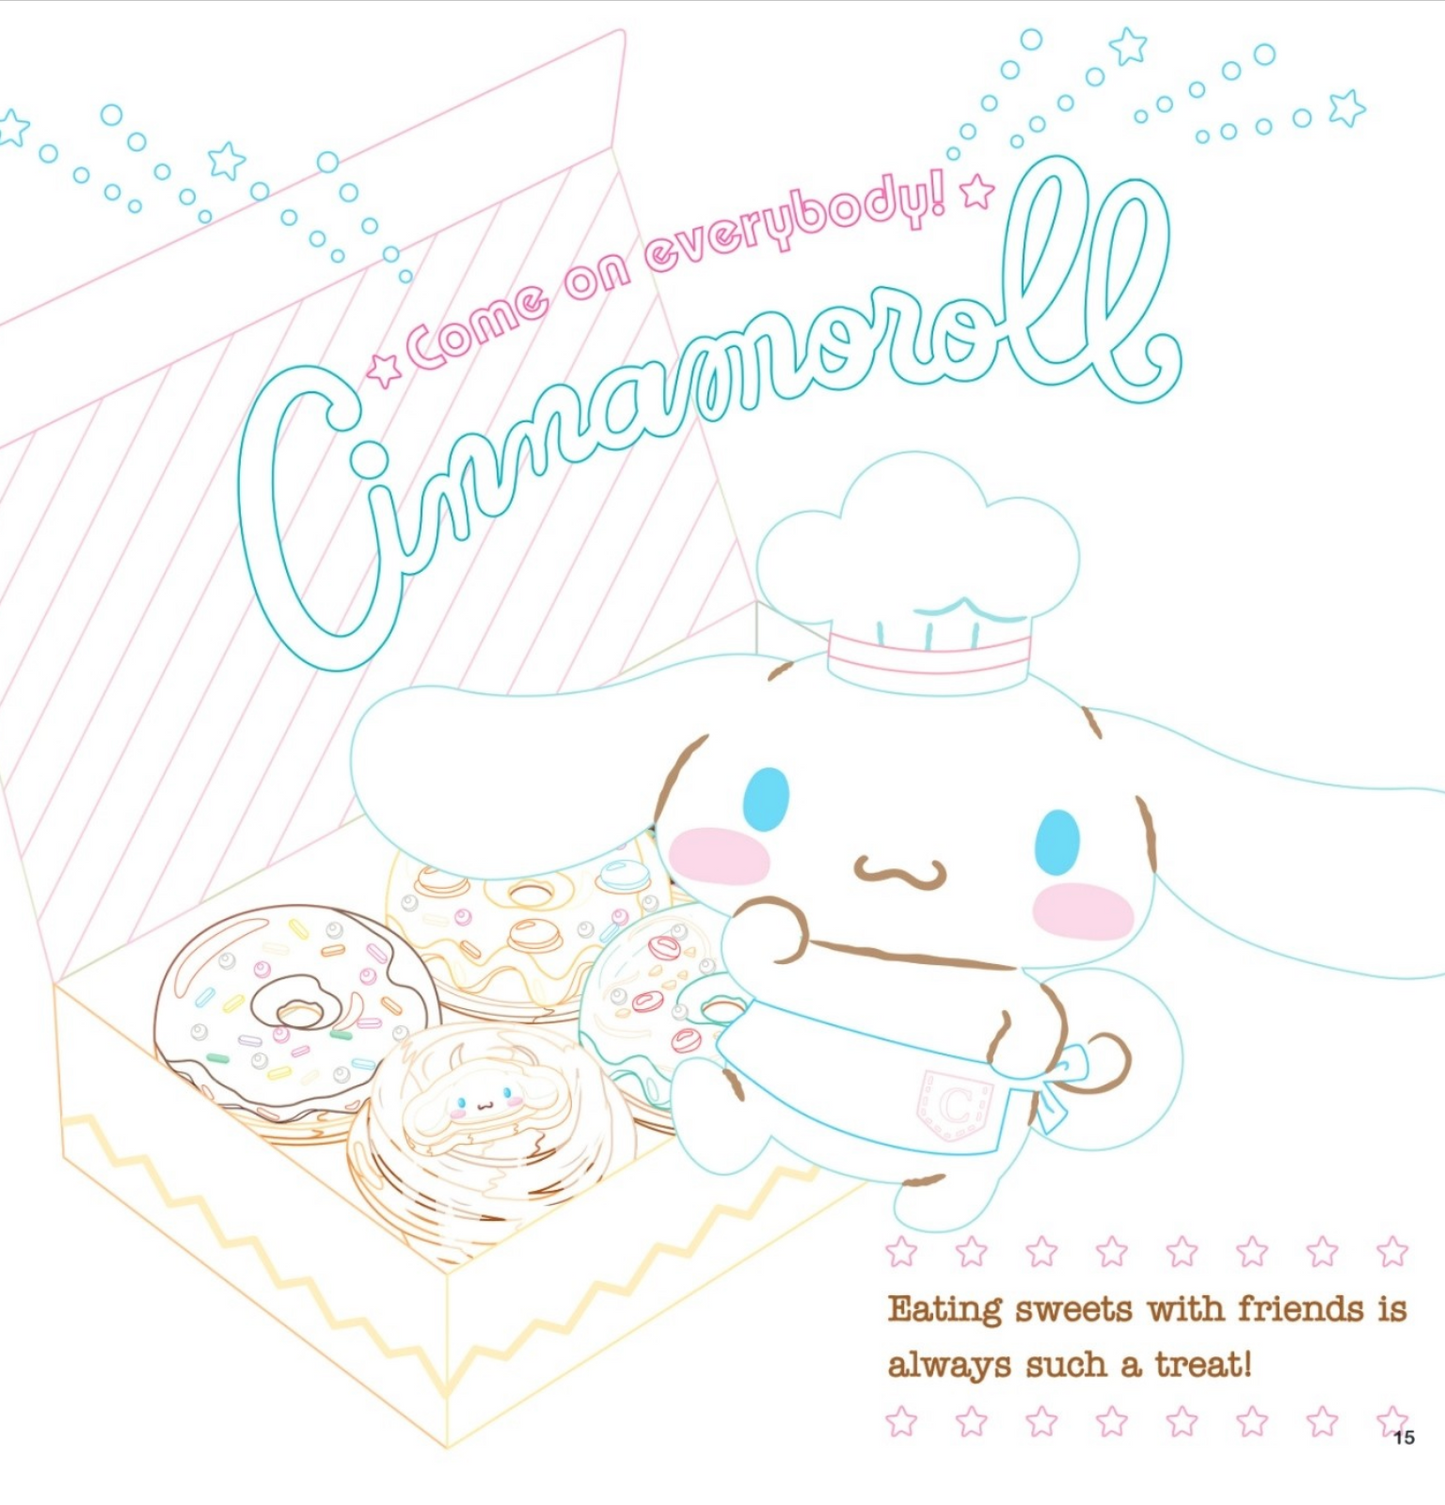 Sanrio Characters Coloring Book Vol.2 with sticker